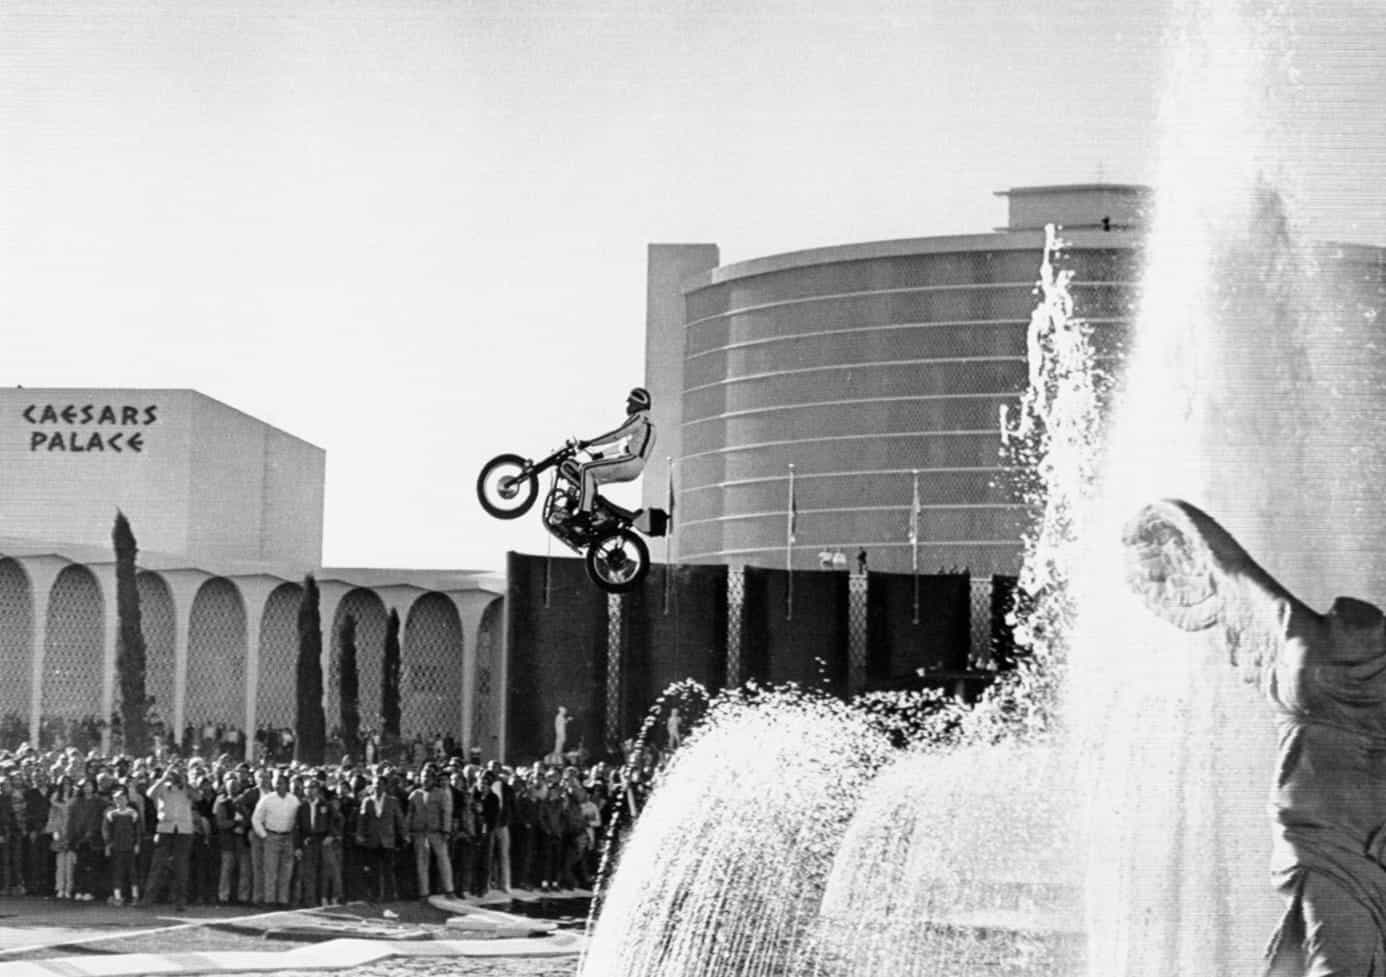 Motorcycle stunt man Evel Knievel jumping over the fountains at Caesars Palace in Las Vegas.